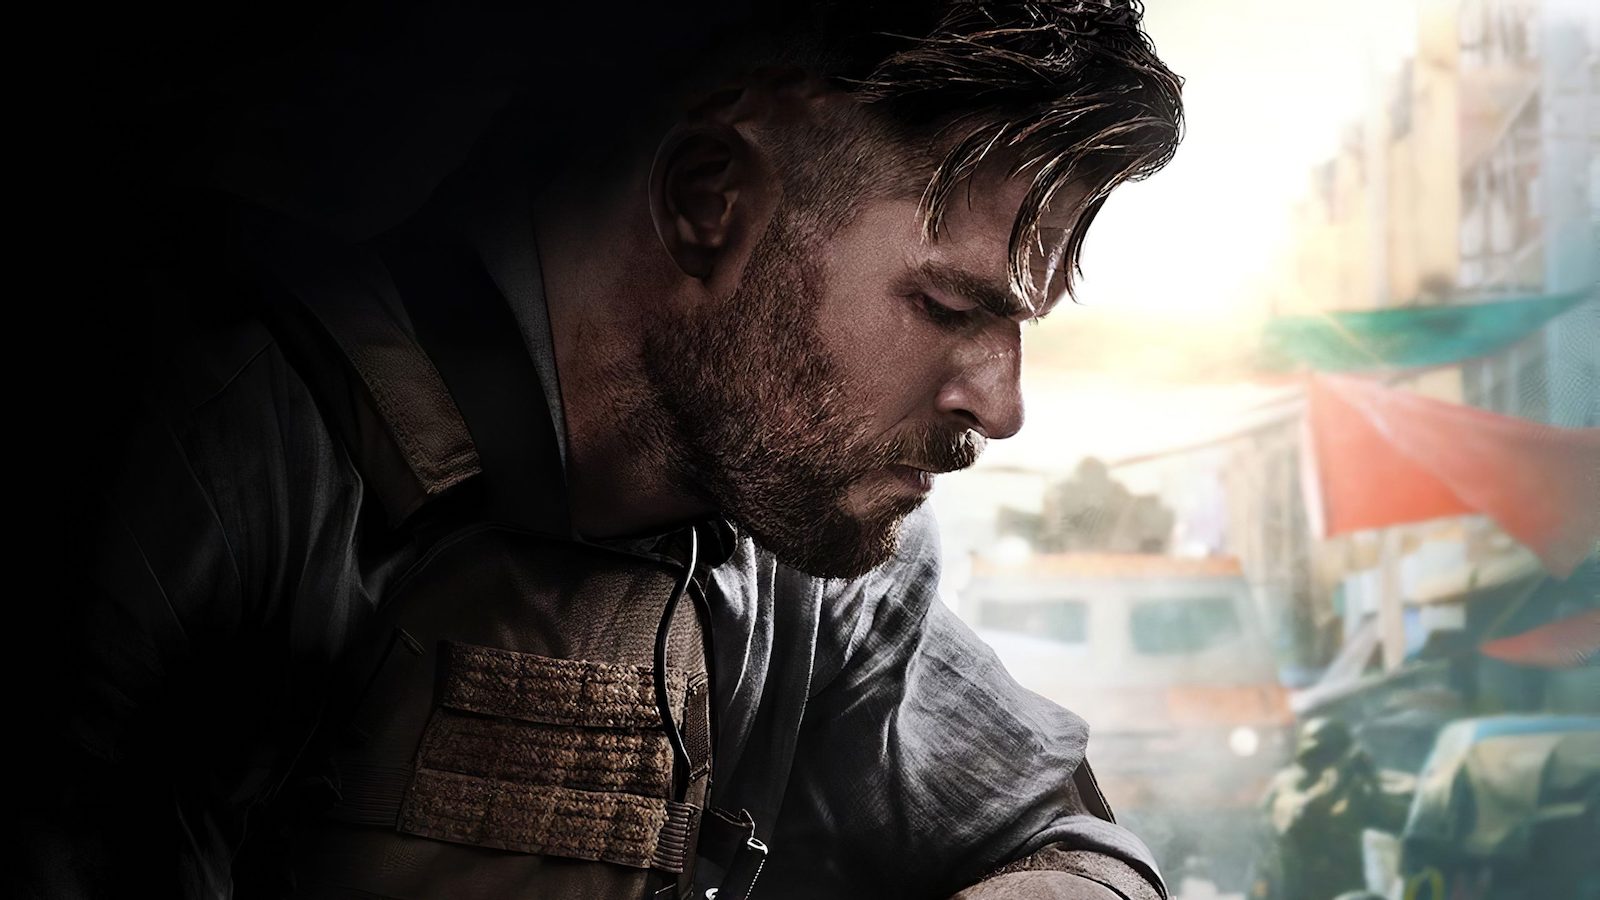 Tyler Rake 3: official the third film of the Netflix franchise with Chris Hemsworth